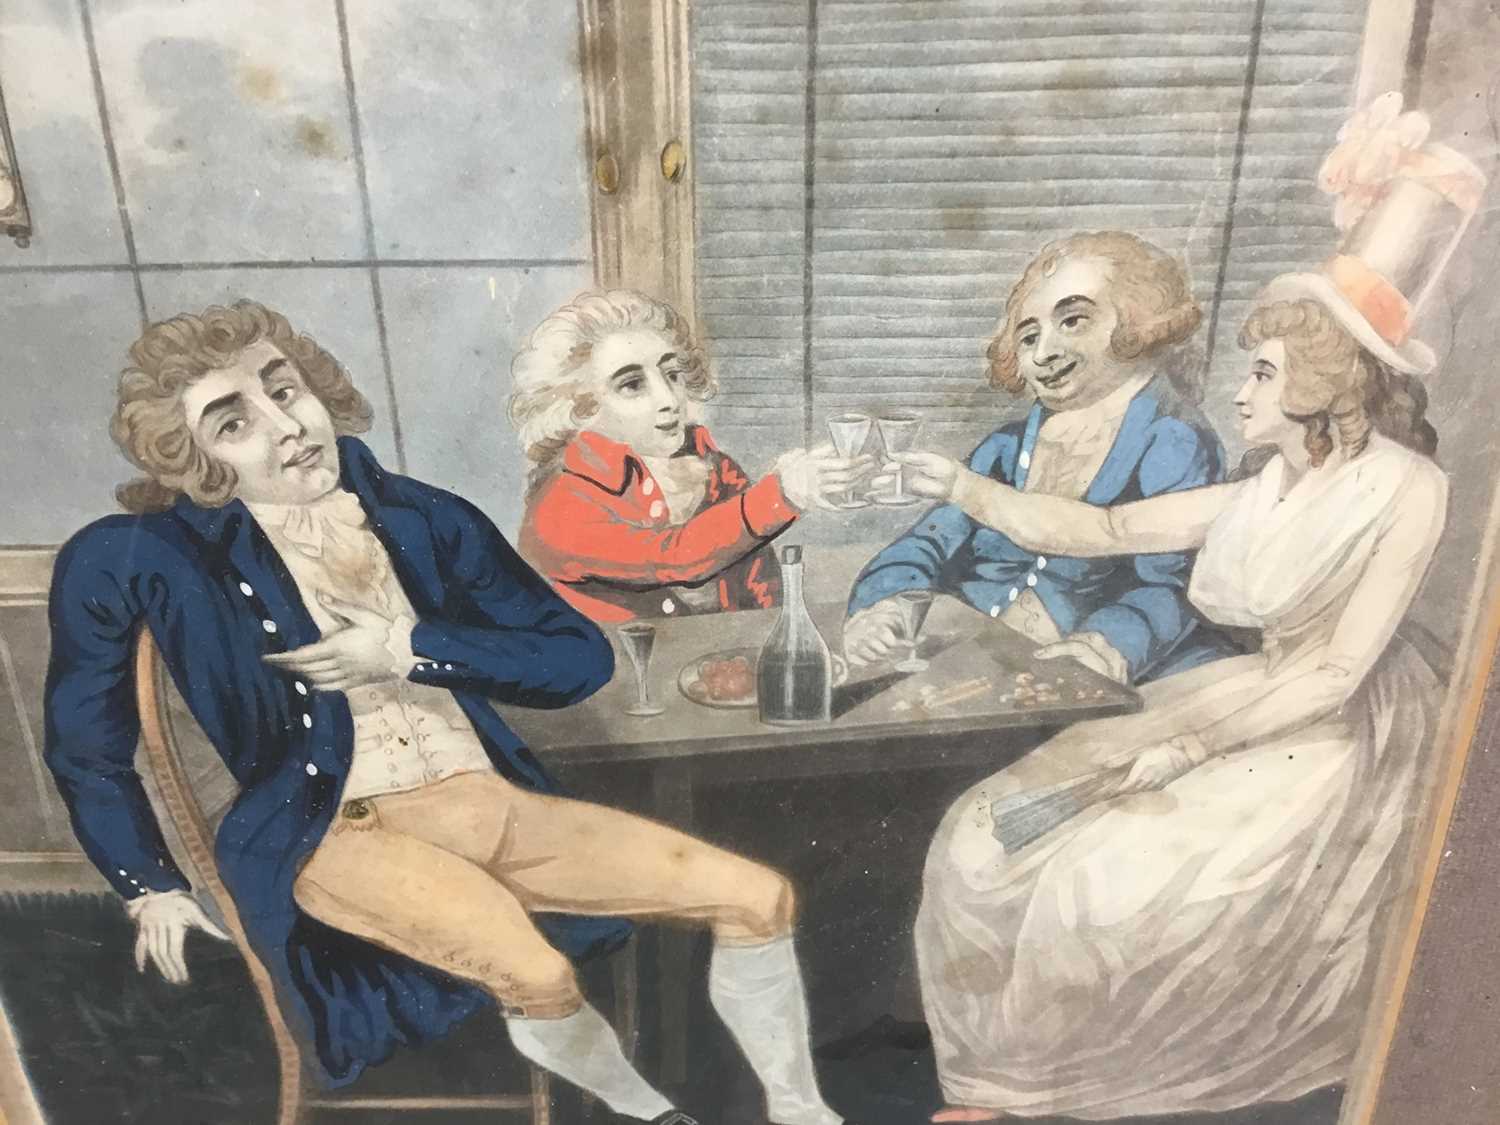 Late 18th century caricature - 'From night till morn I take my glass', pub. Oct. 20th 1792 printed R - Image 5 of 7